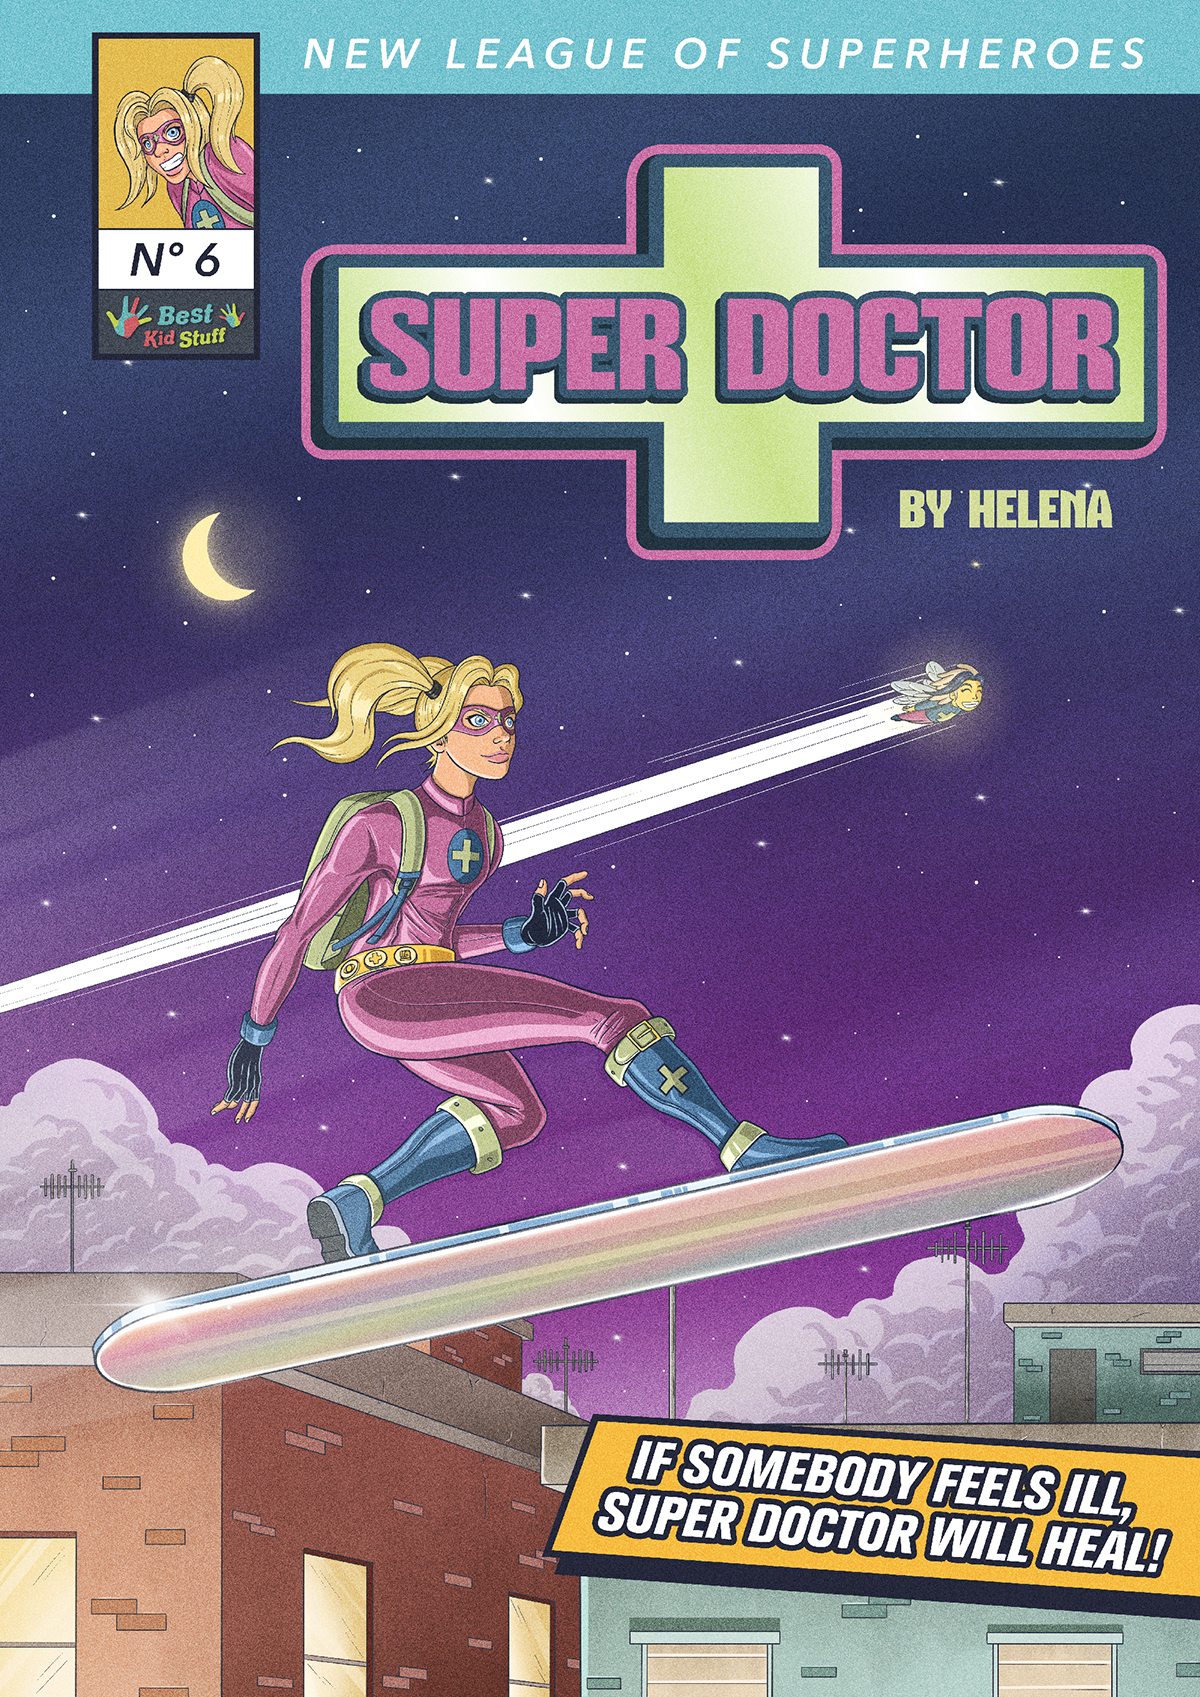 06 New League of Superheroes Super Doctor